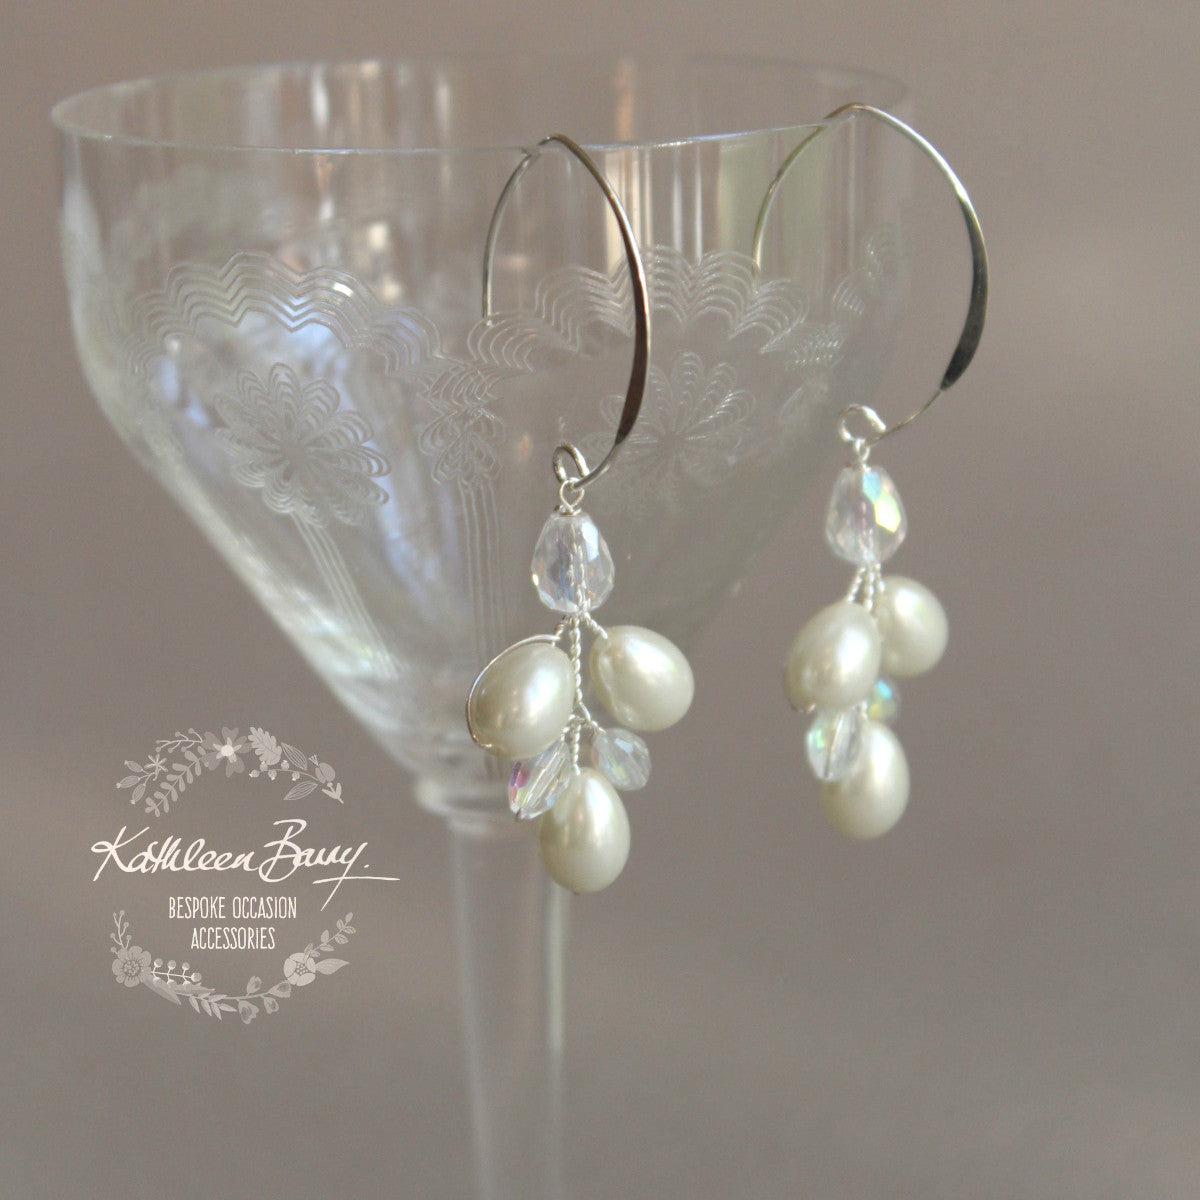 Tamara pearl crystal chandelier earrings pink or ivory - Options : Silver, pale gold or rose gold